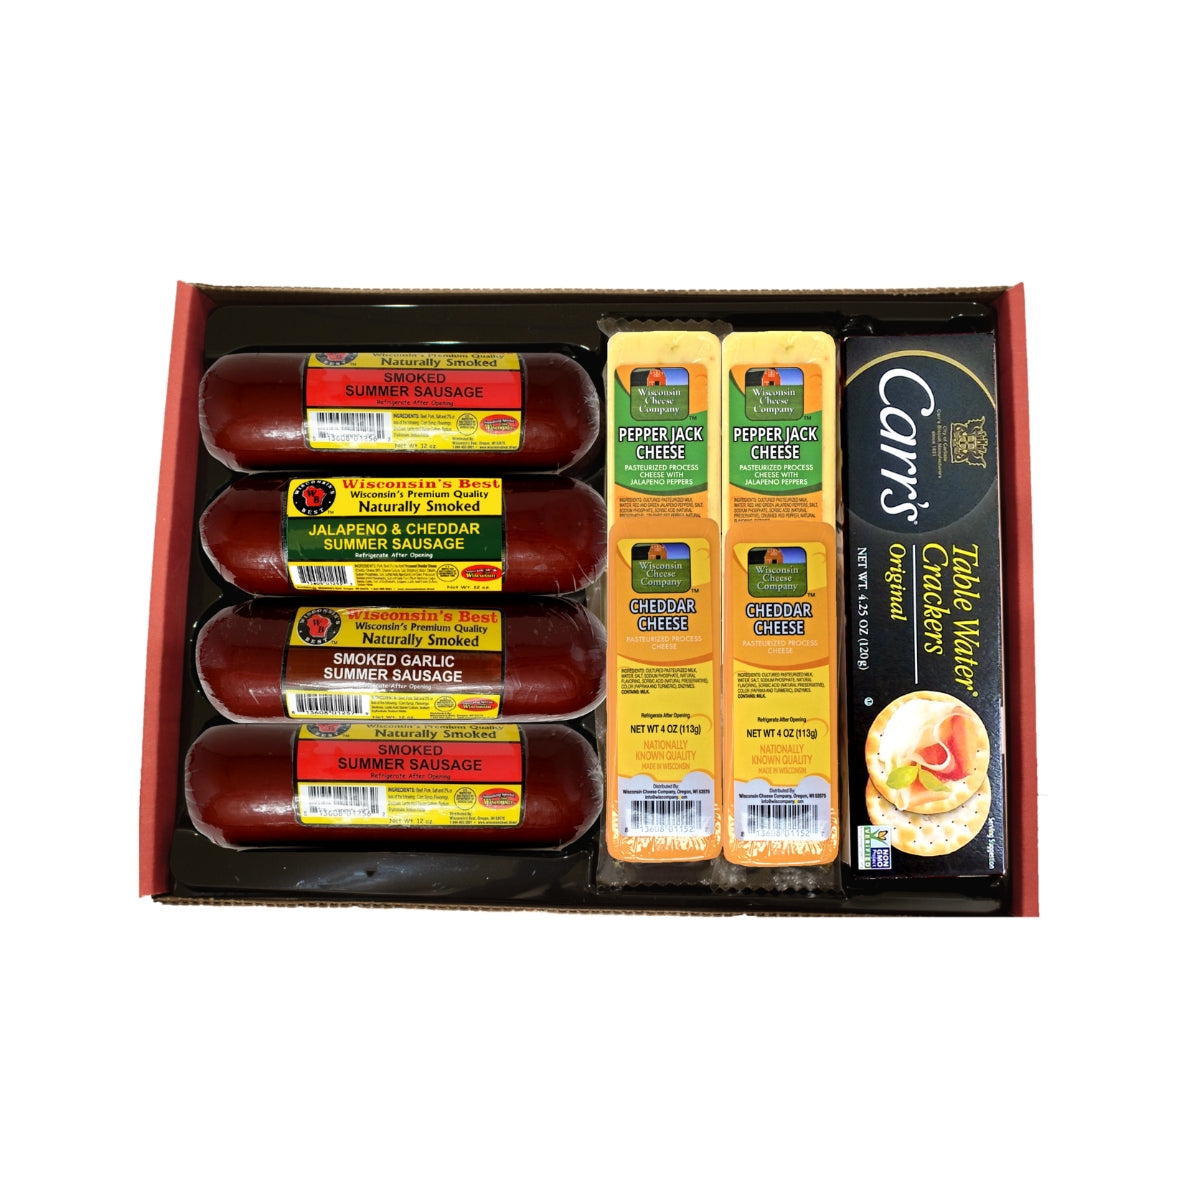 Wisconsin Ultimate Mancave Summer Sausage & Pepper Jack & Cheddar Cheese & Cracker Gift Box, A Great Family Gourmet Gift. Perfect Gift for Birthdays or Mother's Day.